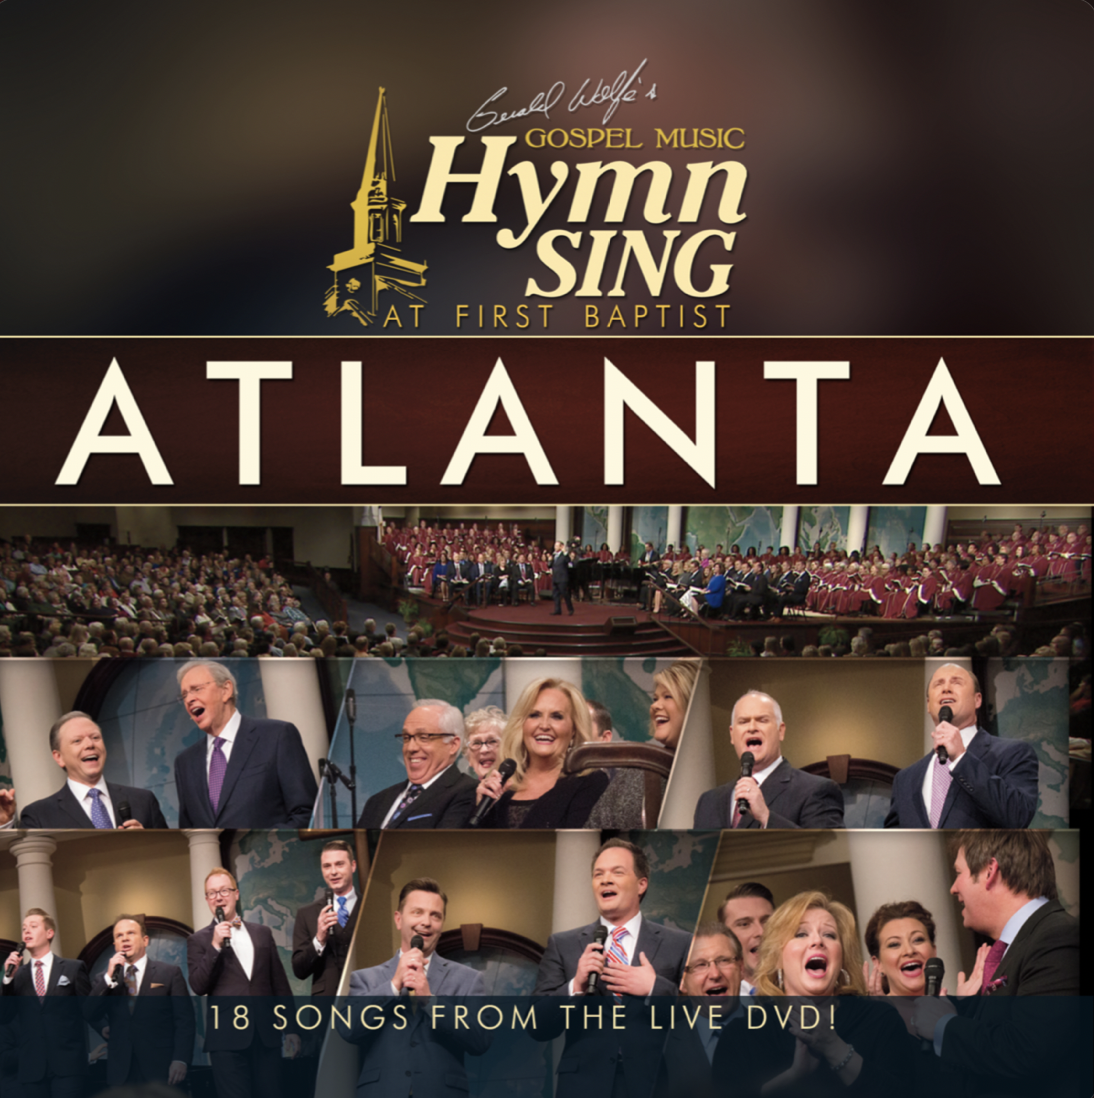 Art for Stand Up For Jesus by The Gospel Music Hymn Sing